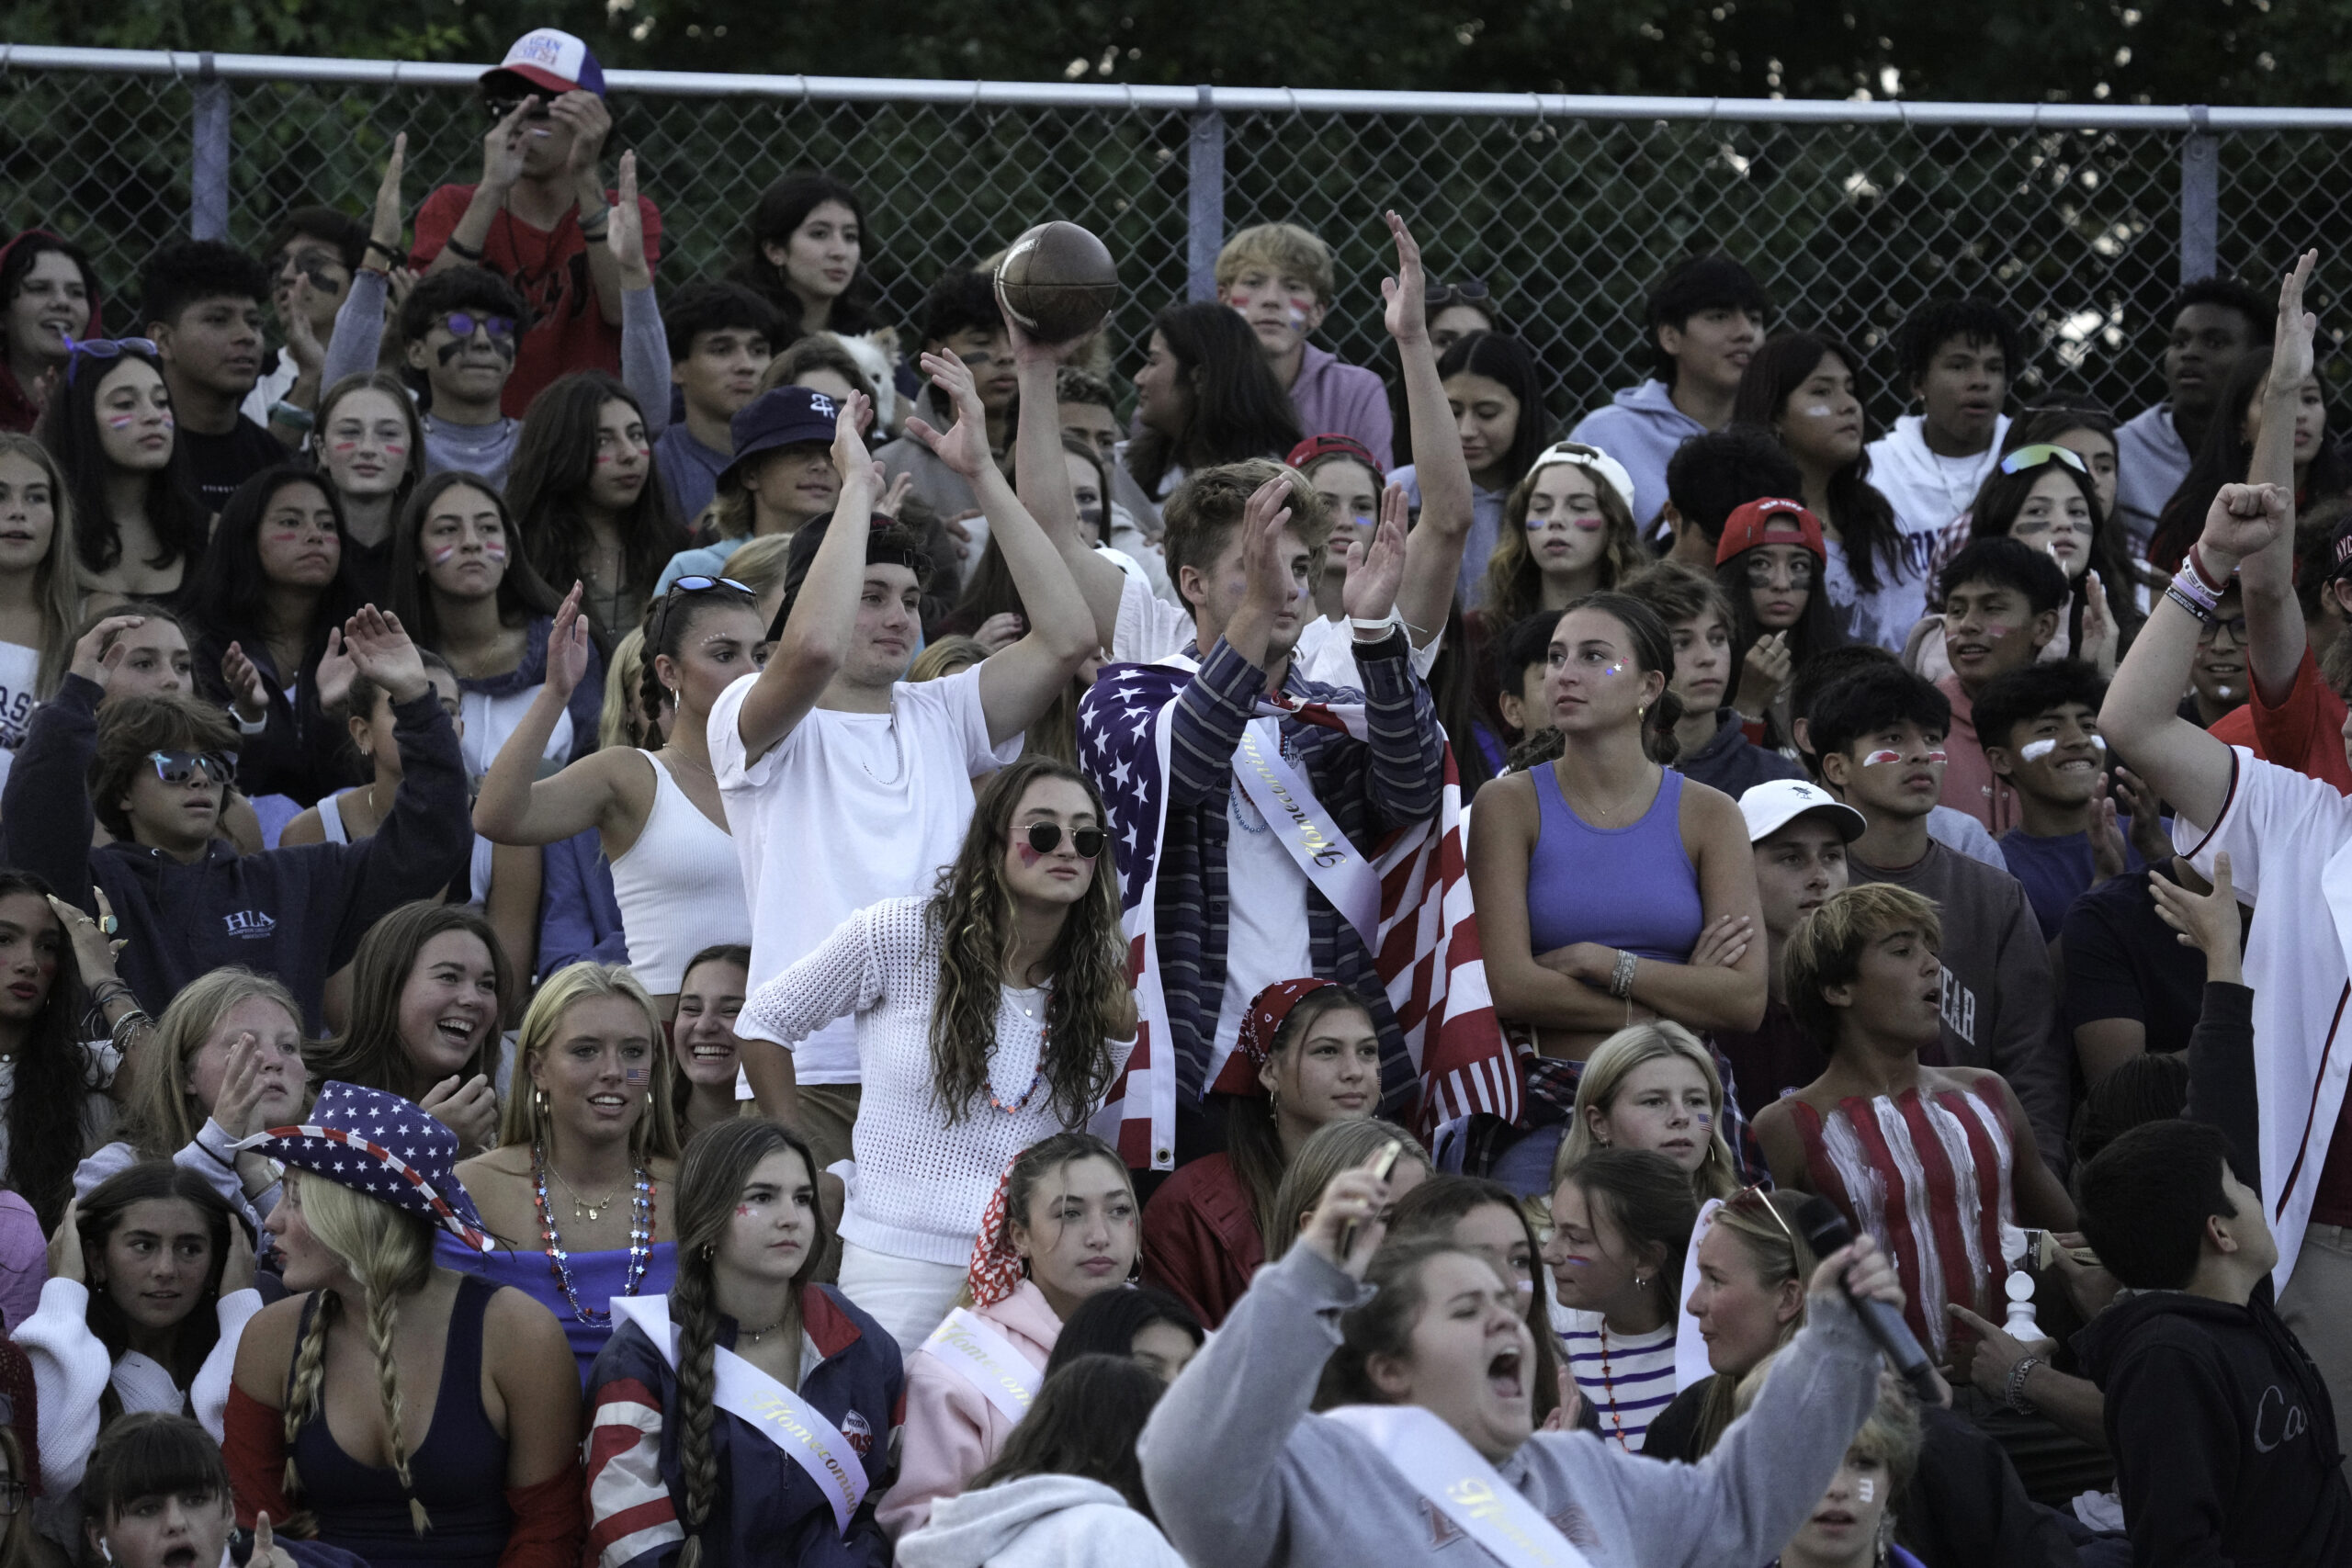 A good crowd, including Bonac's student section, was on hand for the East Hampton/Bridgehampton football team's homecoming game on Saturday night.   RON ESPOSITO